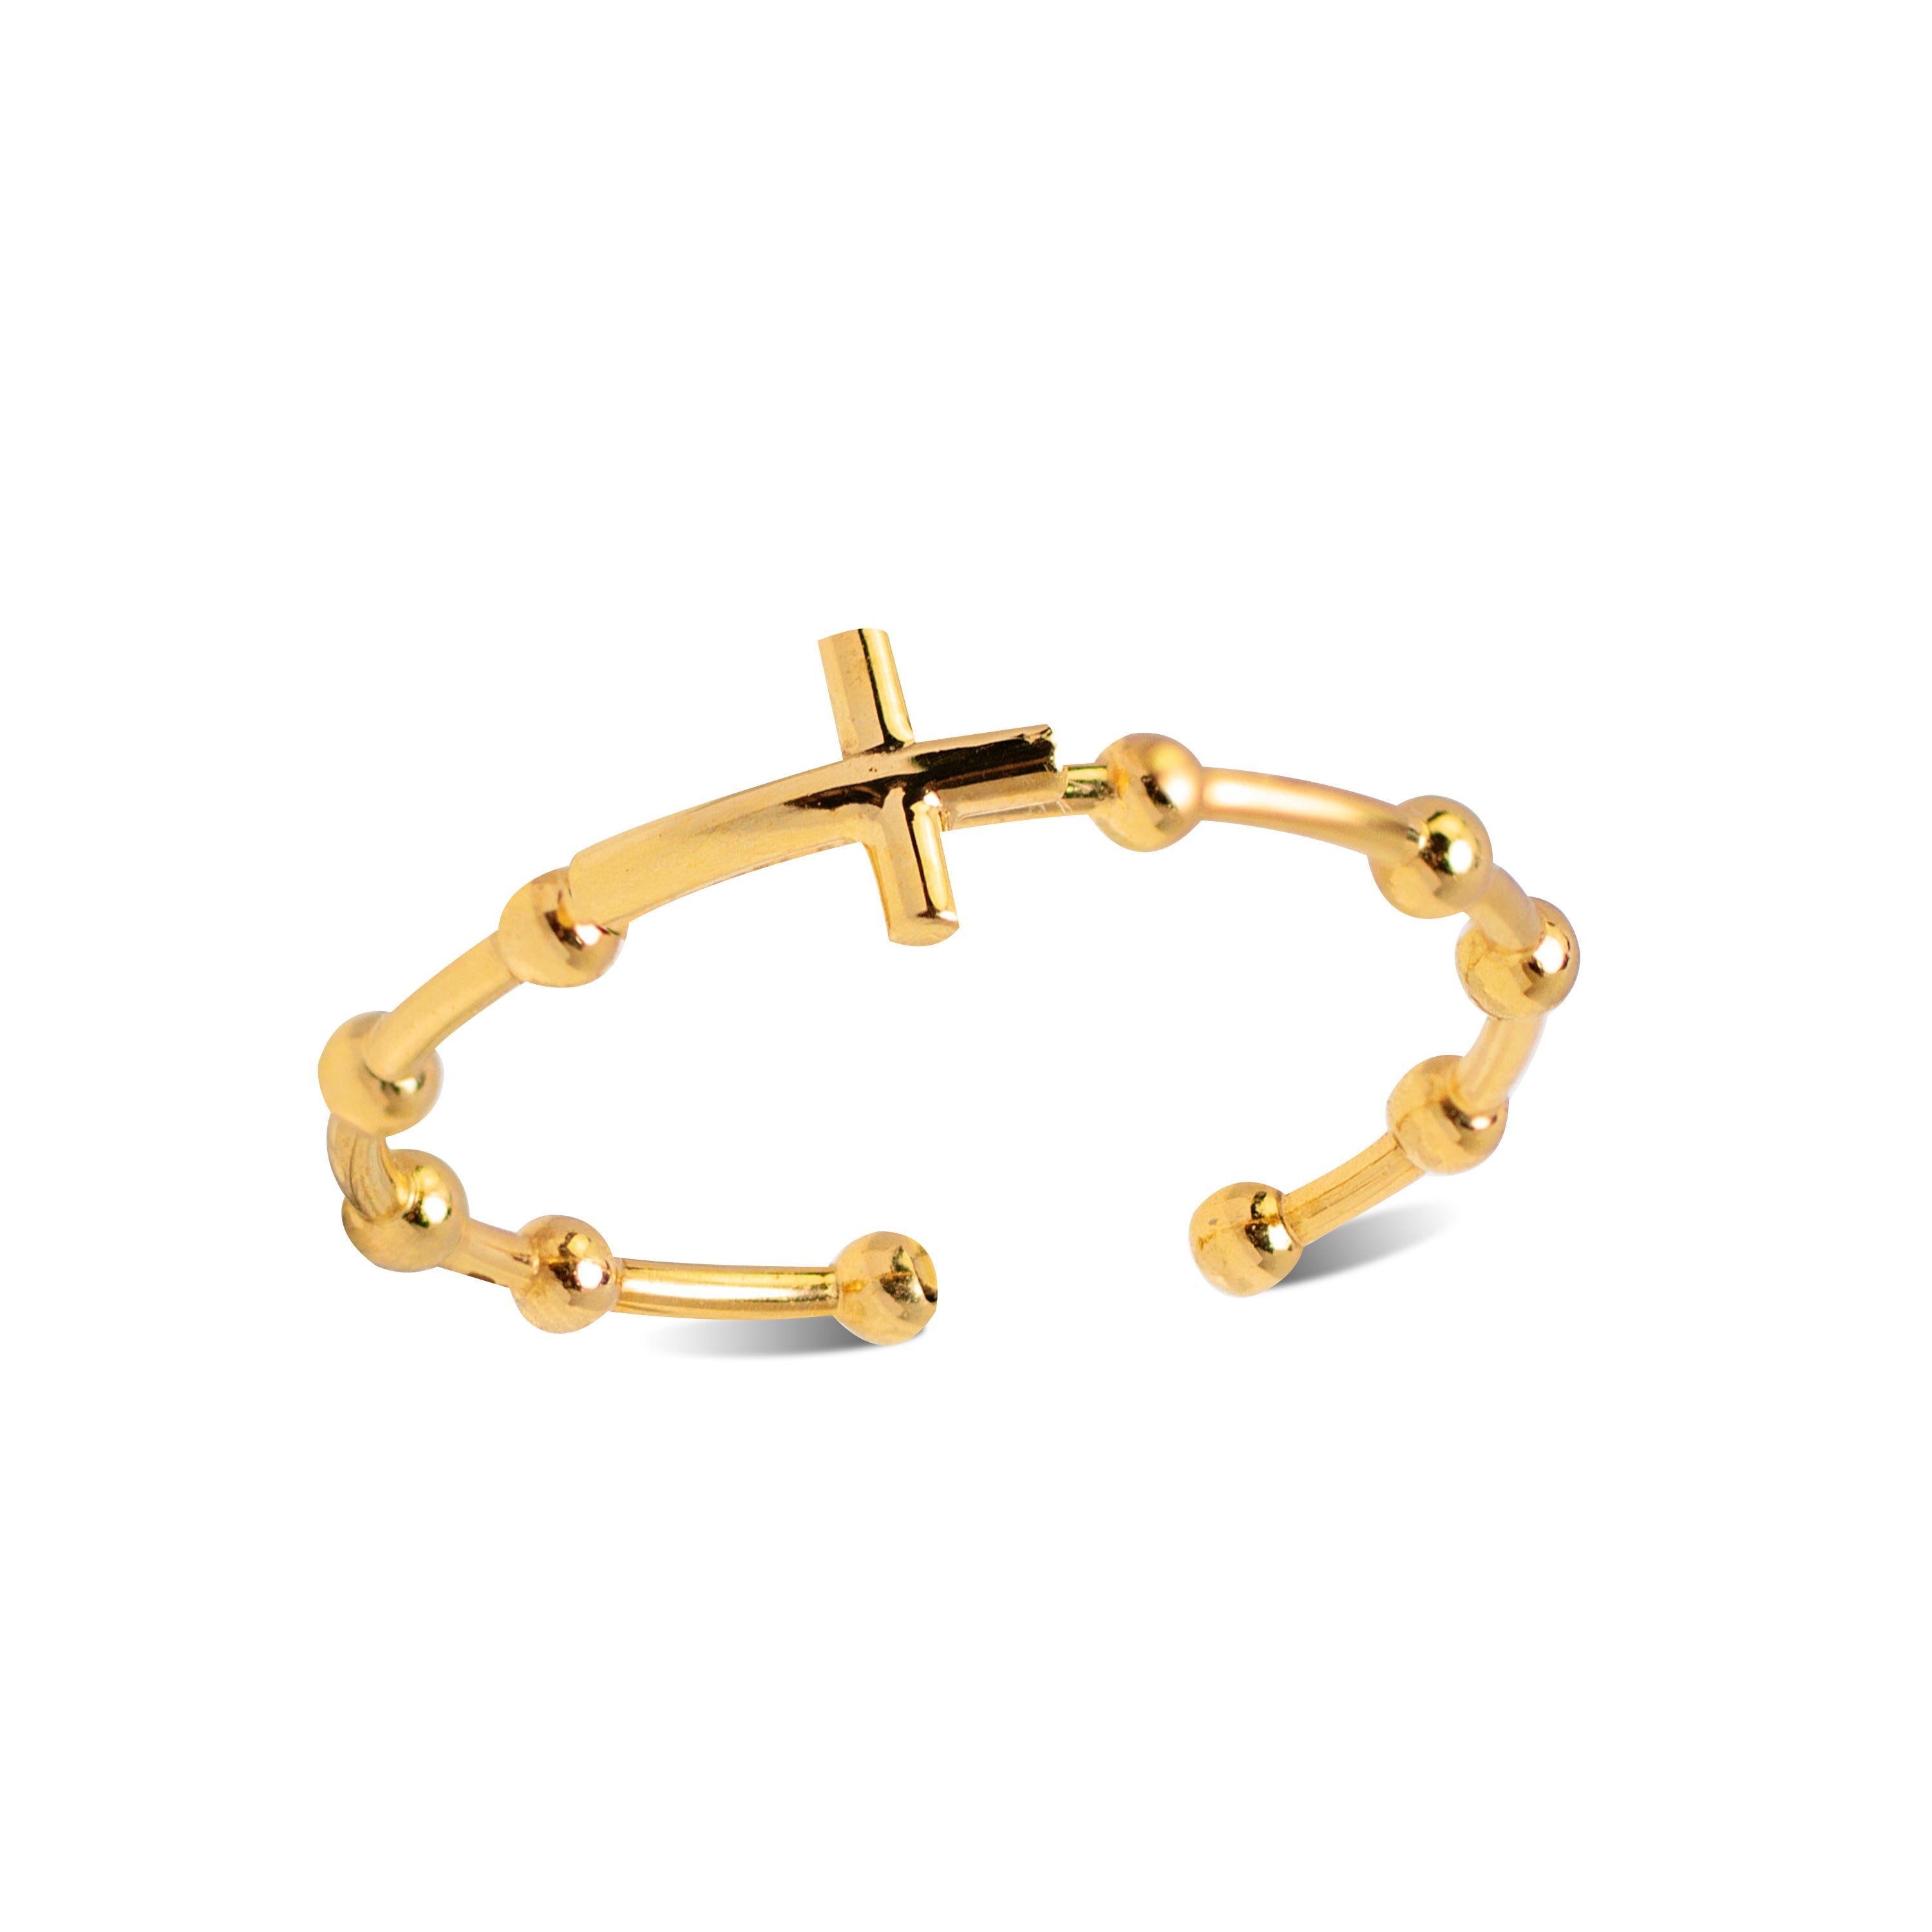 Buy Bonyak Jewelry 10k Yellow Gold Rosary Ring - Size 6 at Amazon.in